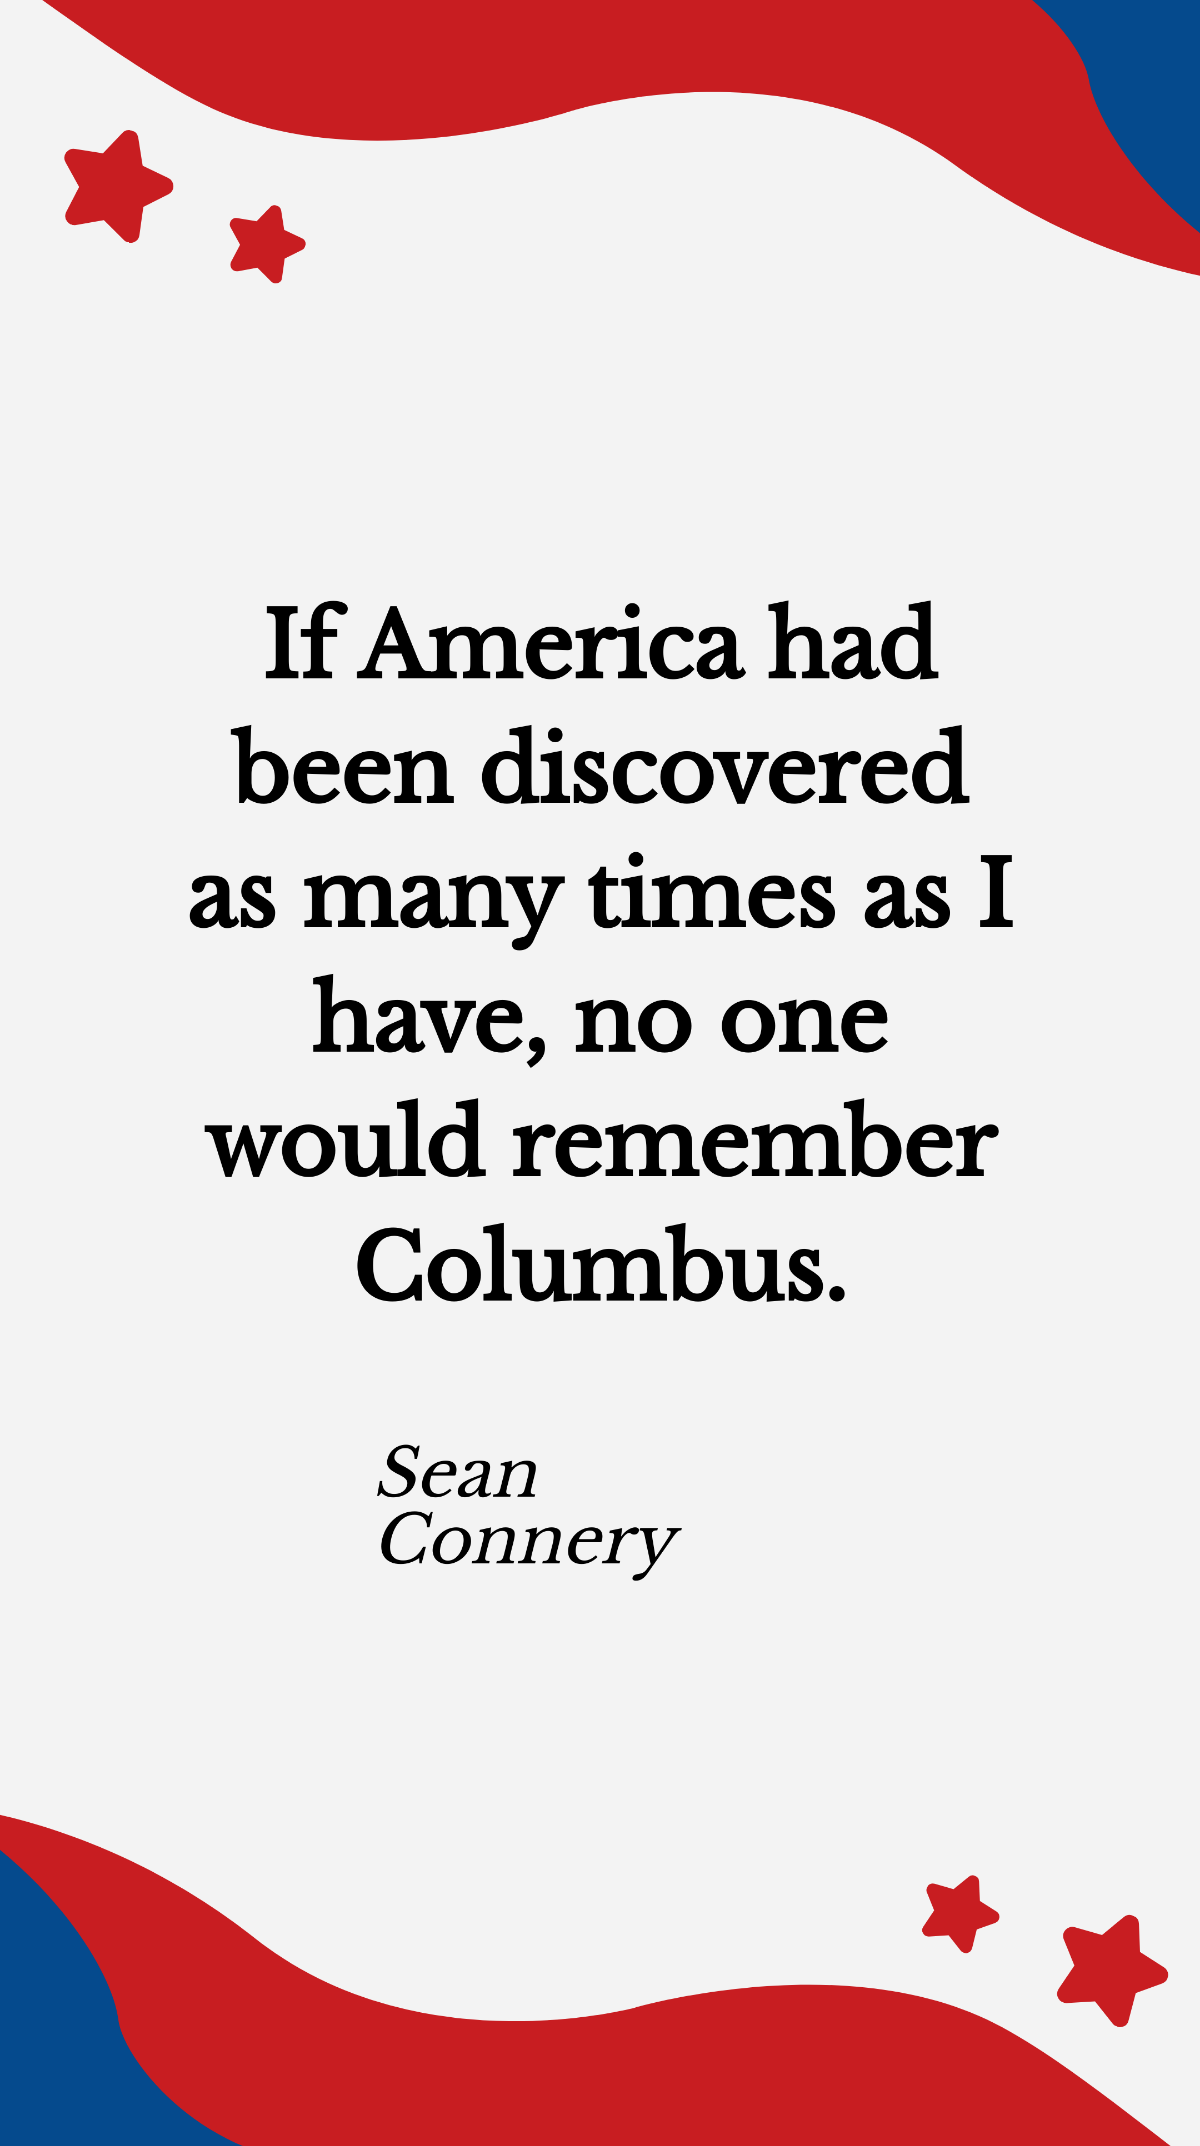 Sean Connery- If America had been discovered as many times as I have, no one would remember Columbus. Template